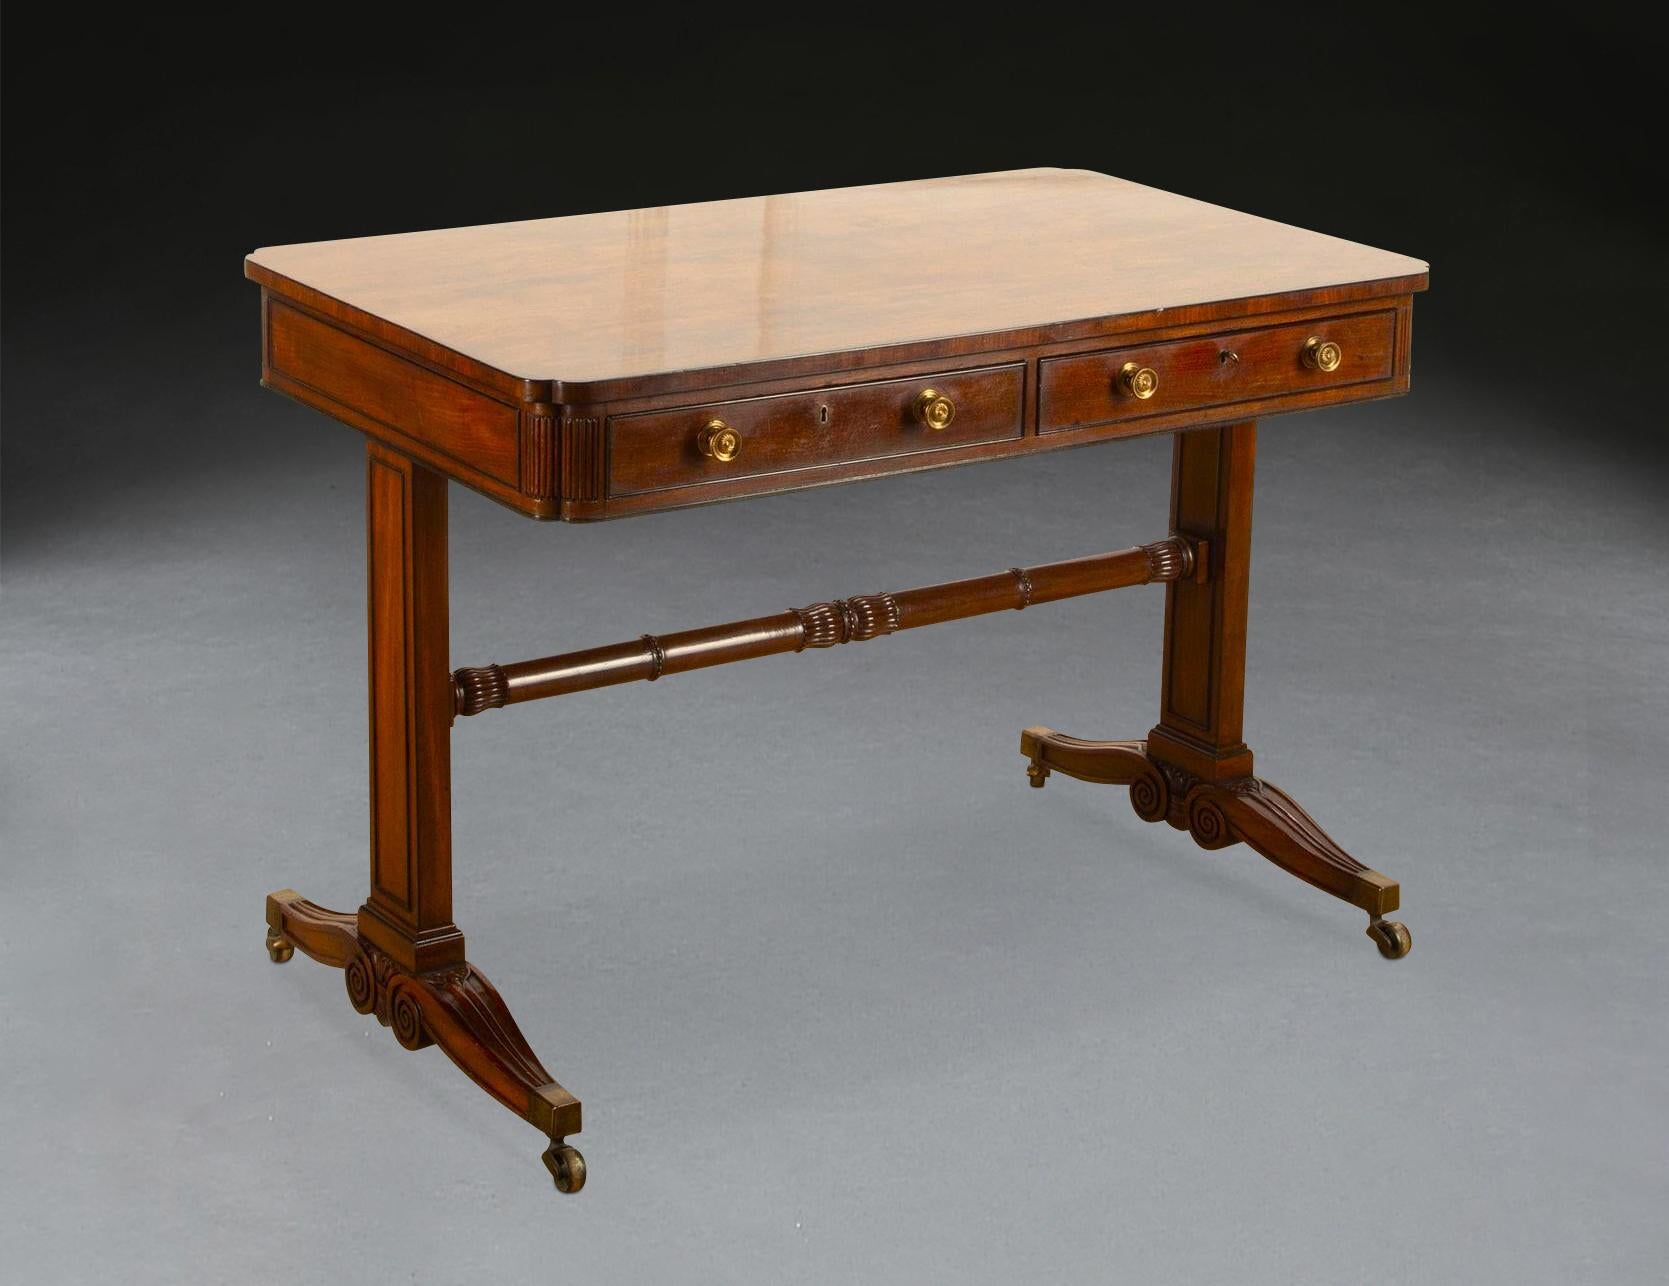 An elegant Regency library/centre table, of mahogany and ebony, the well figured top with re-entrant corners and ebony line inlay above a two drawer frieze with original brass knobs and ebony mouldings, with repeating re-entrant corners and reeded